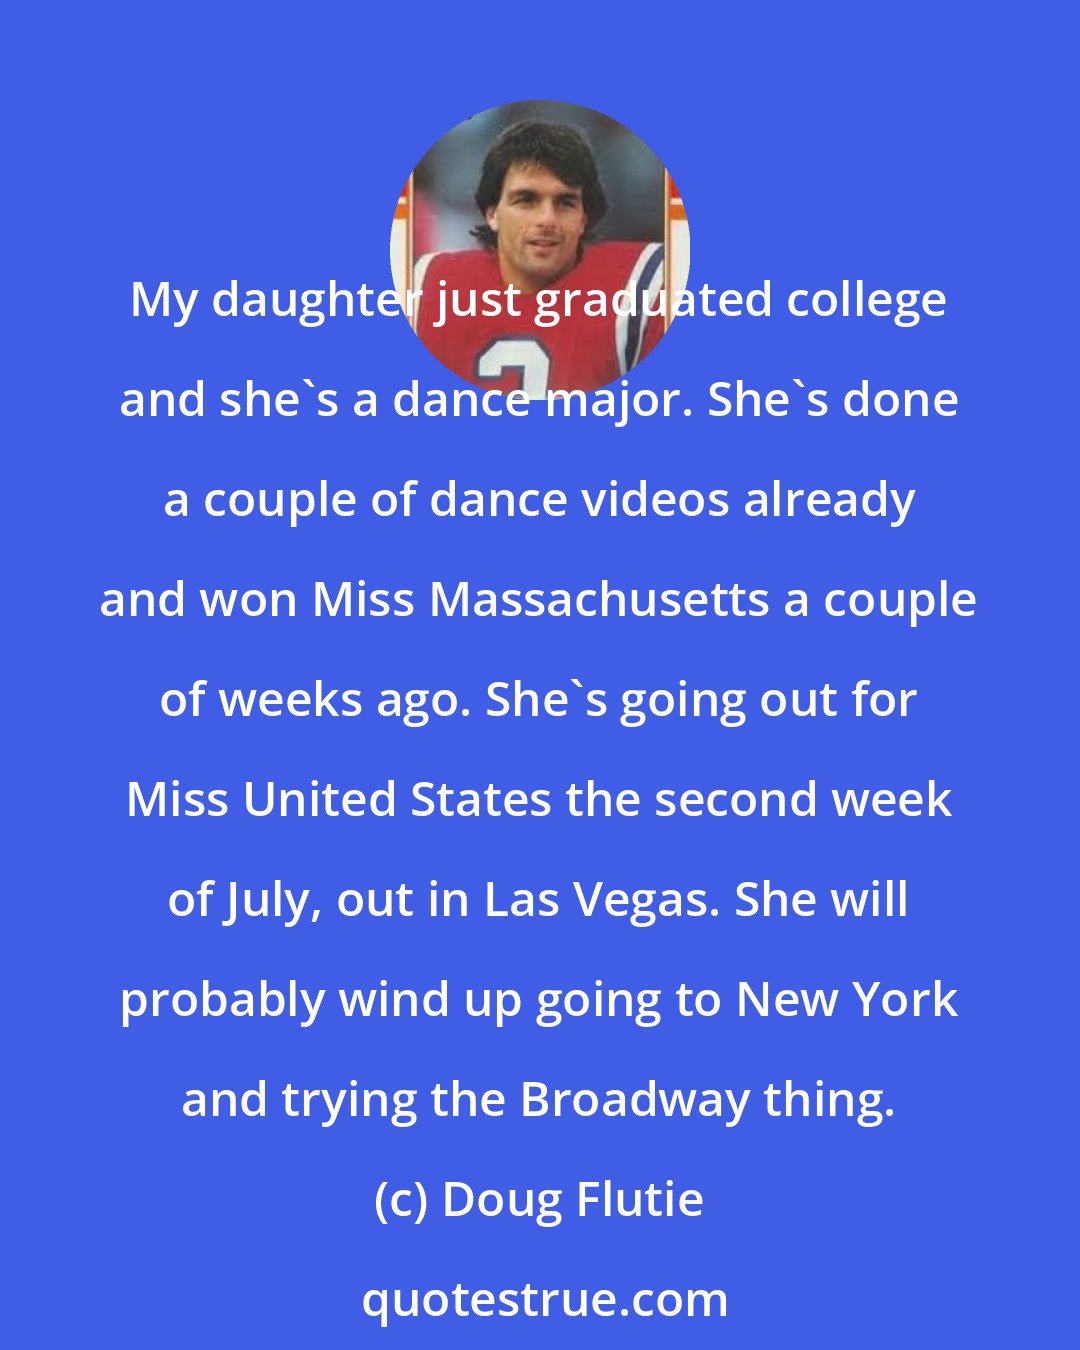 Doug Flutie: My daughter just graduated college and she's a dance major. She's done a couple of dance videos already and won Miss Massachusetts a couple of weeks ago. She's going out for Miss United States the second week of July, out in Las Vegas. She will probably wind up going to New York and trying the Broadway thing.